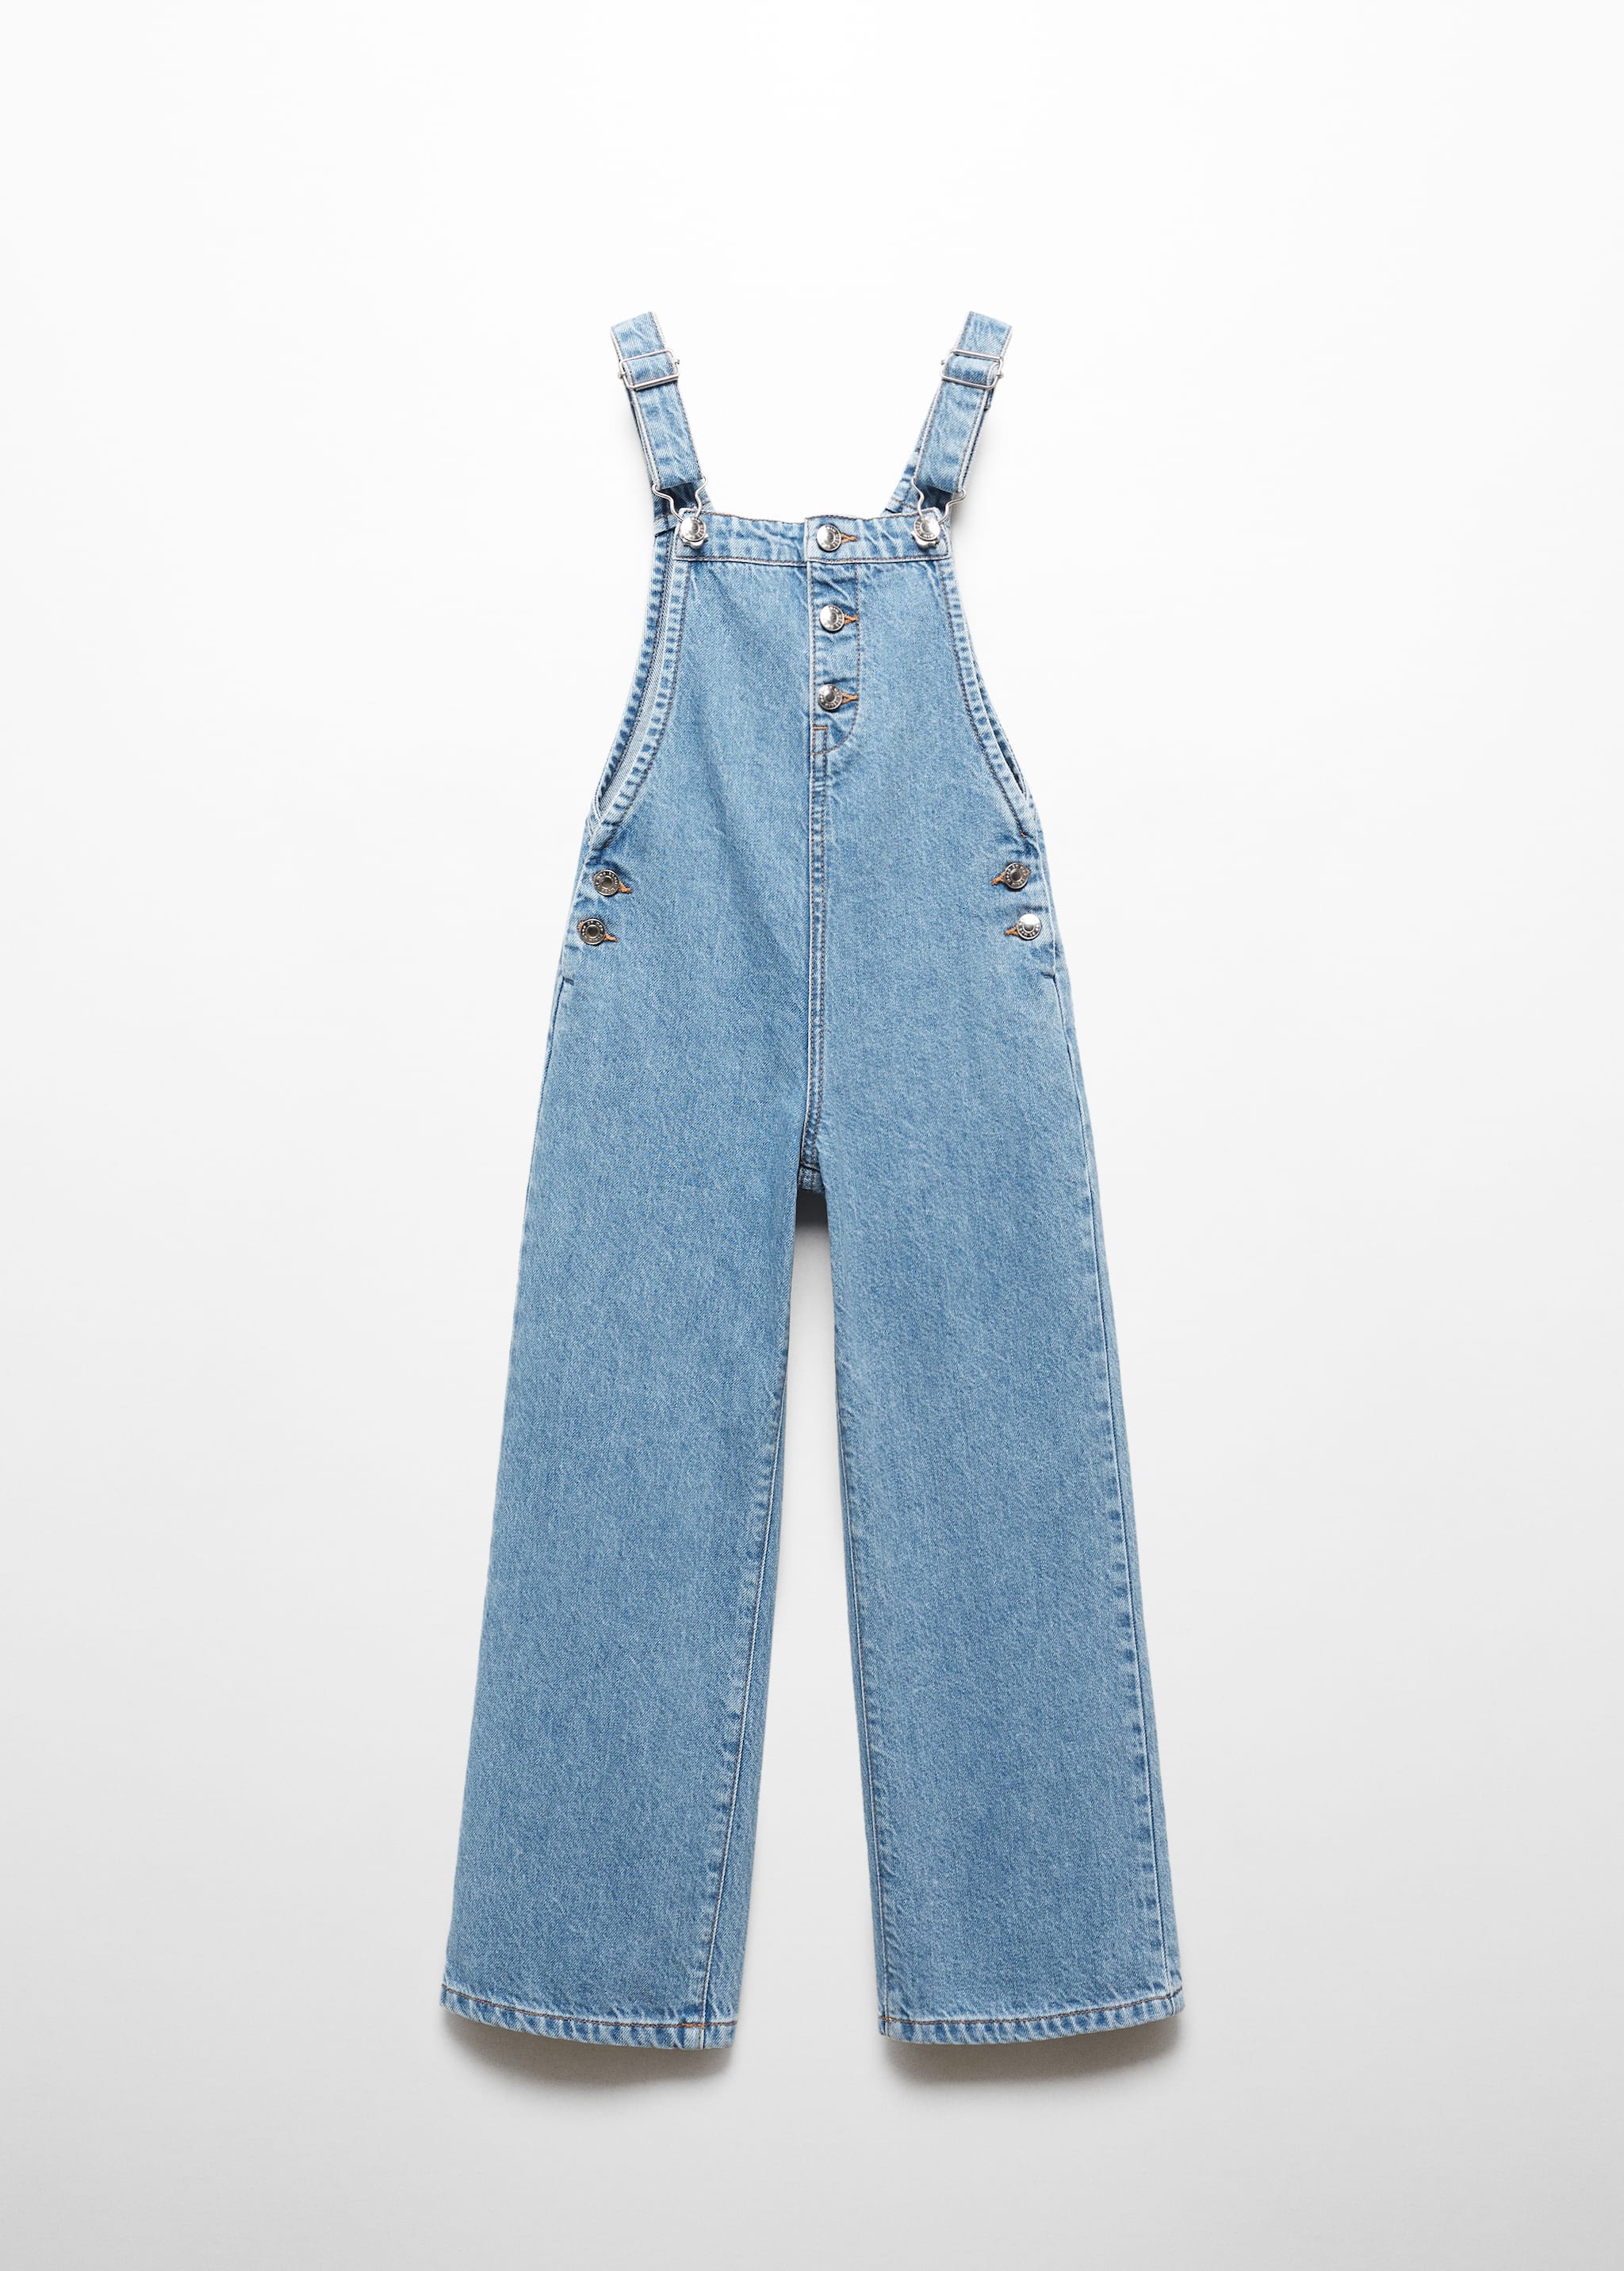 Denim buttoned dungarees - Article without model